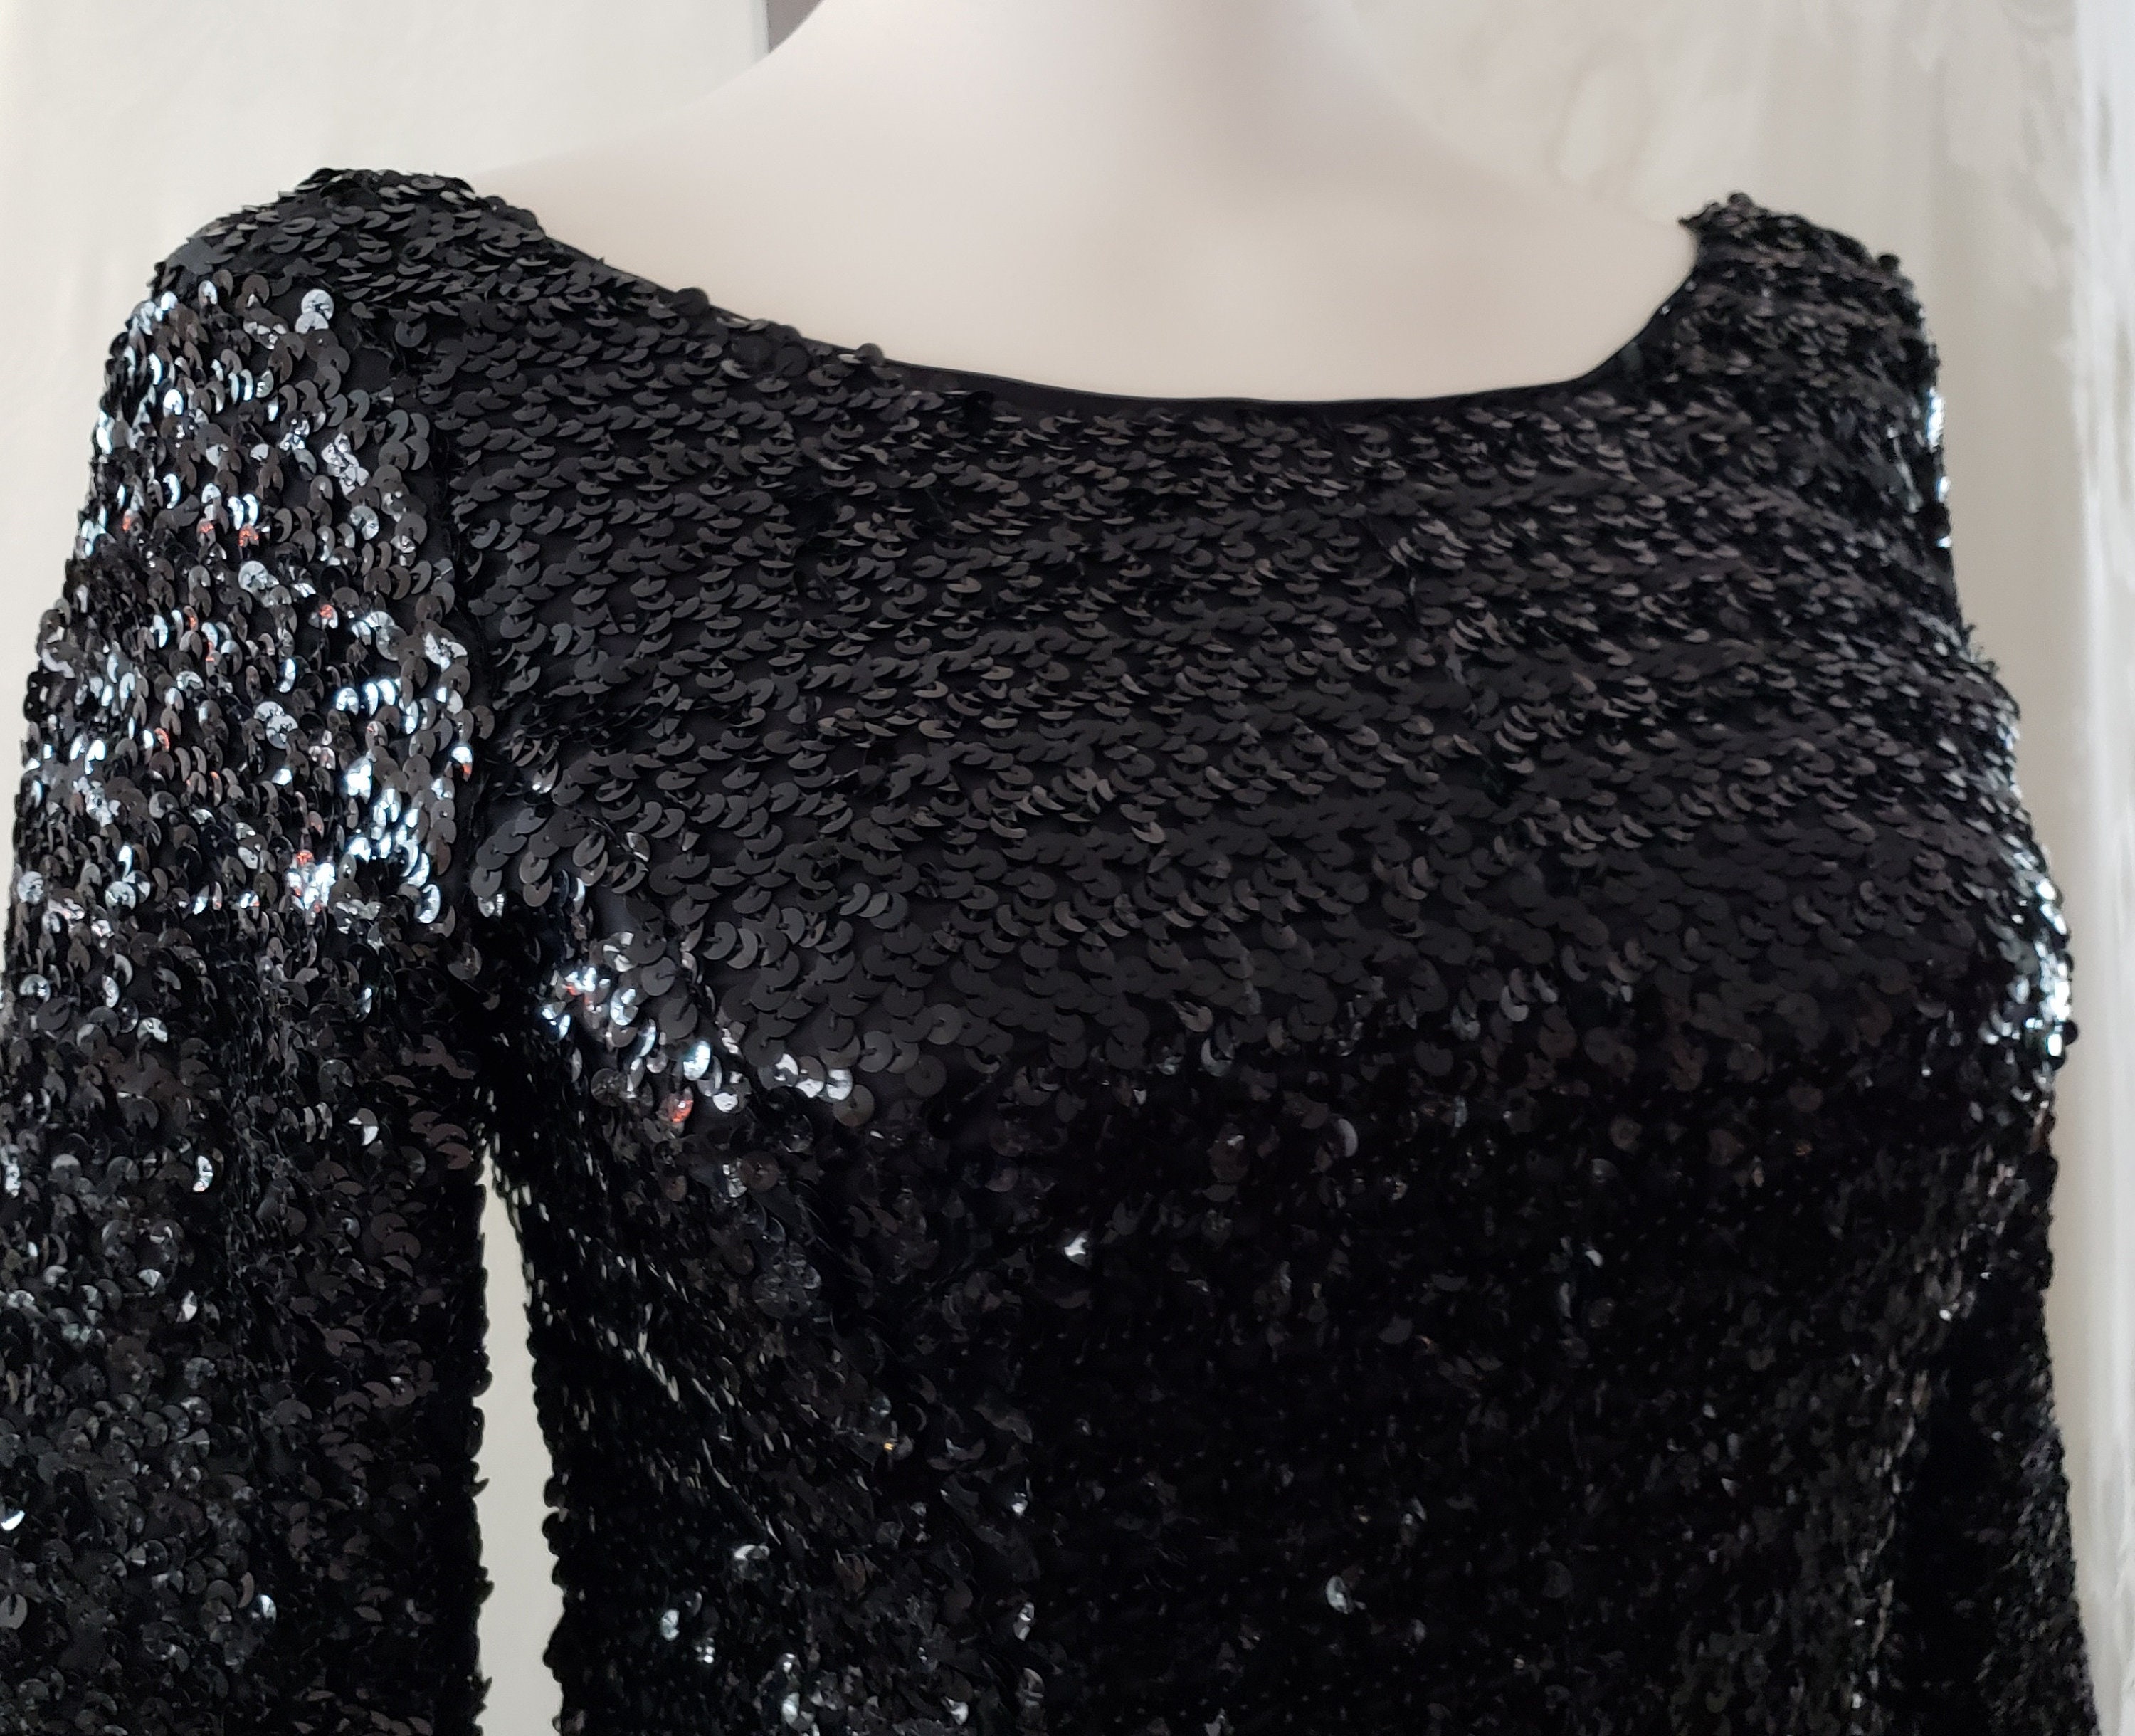 A ''million Sparkly Sequins Dress Looking Like a - Etsy